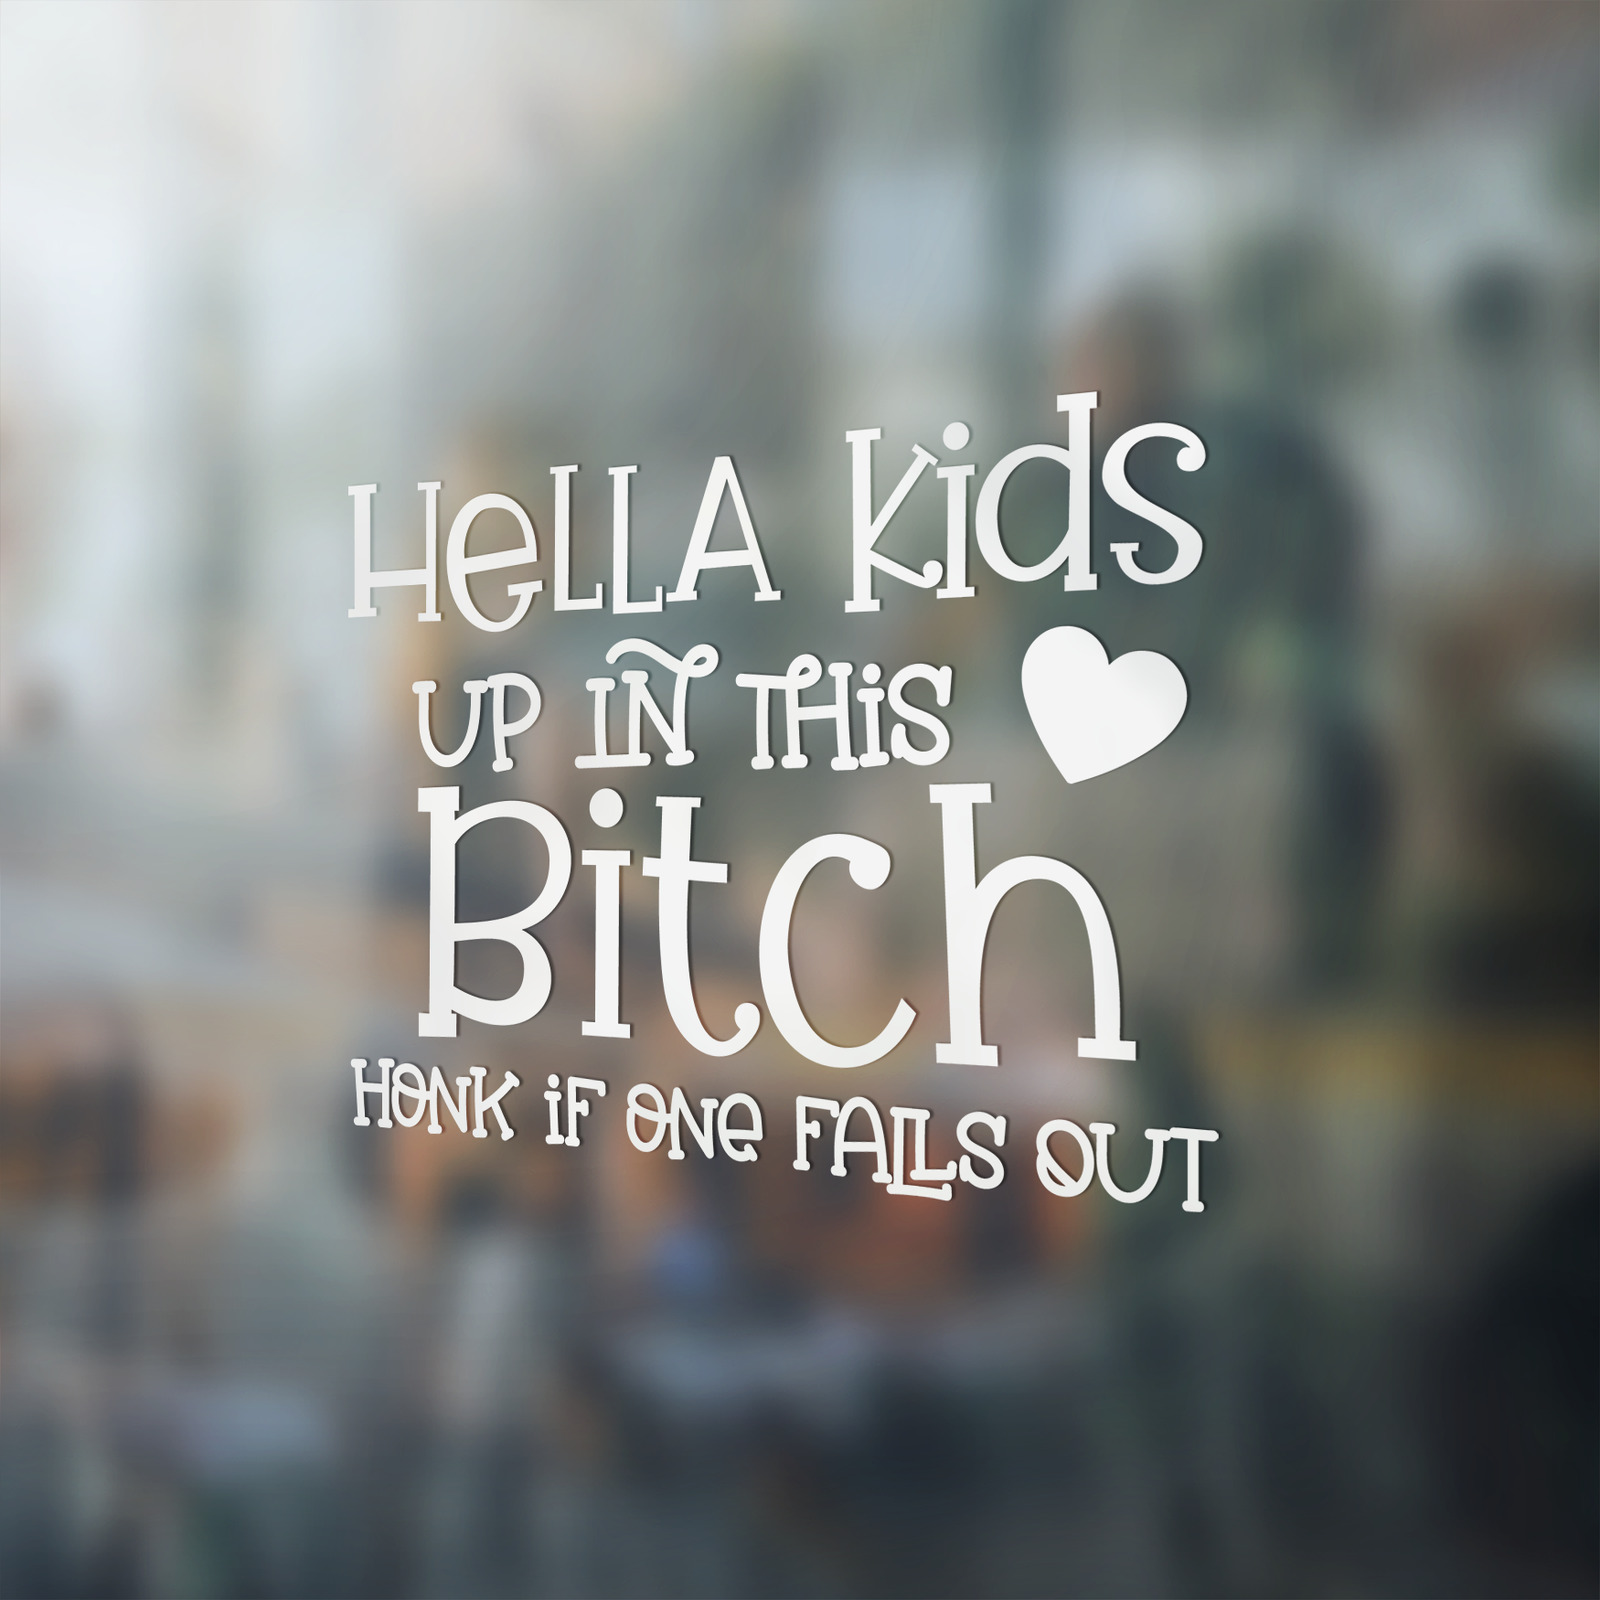 Hella Kids Up In This Bitch Honk If One Falls Out Premium Vinyl Decal